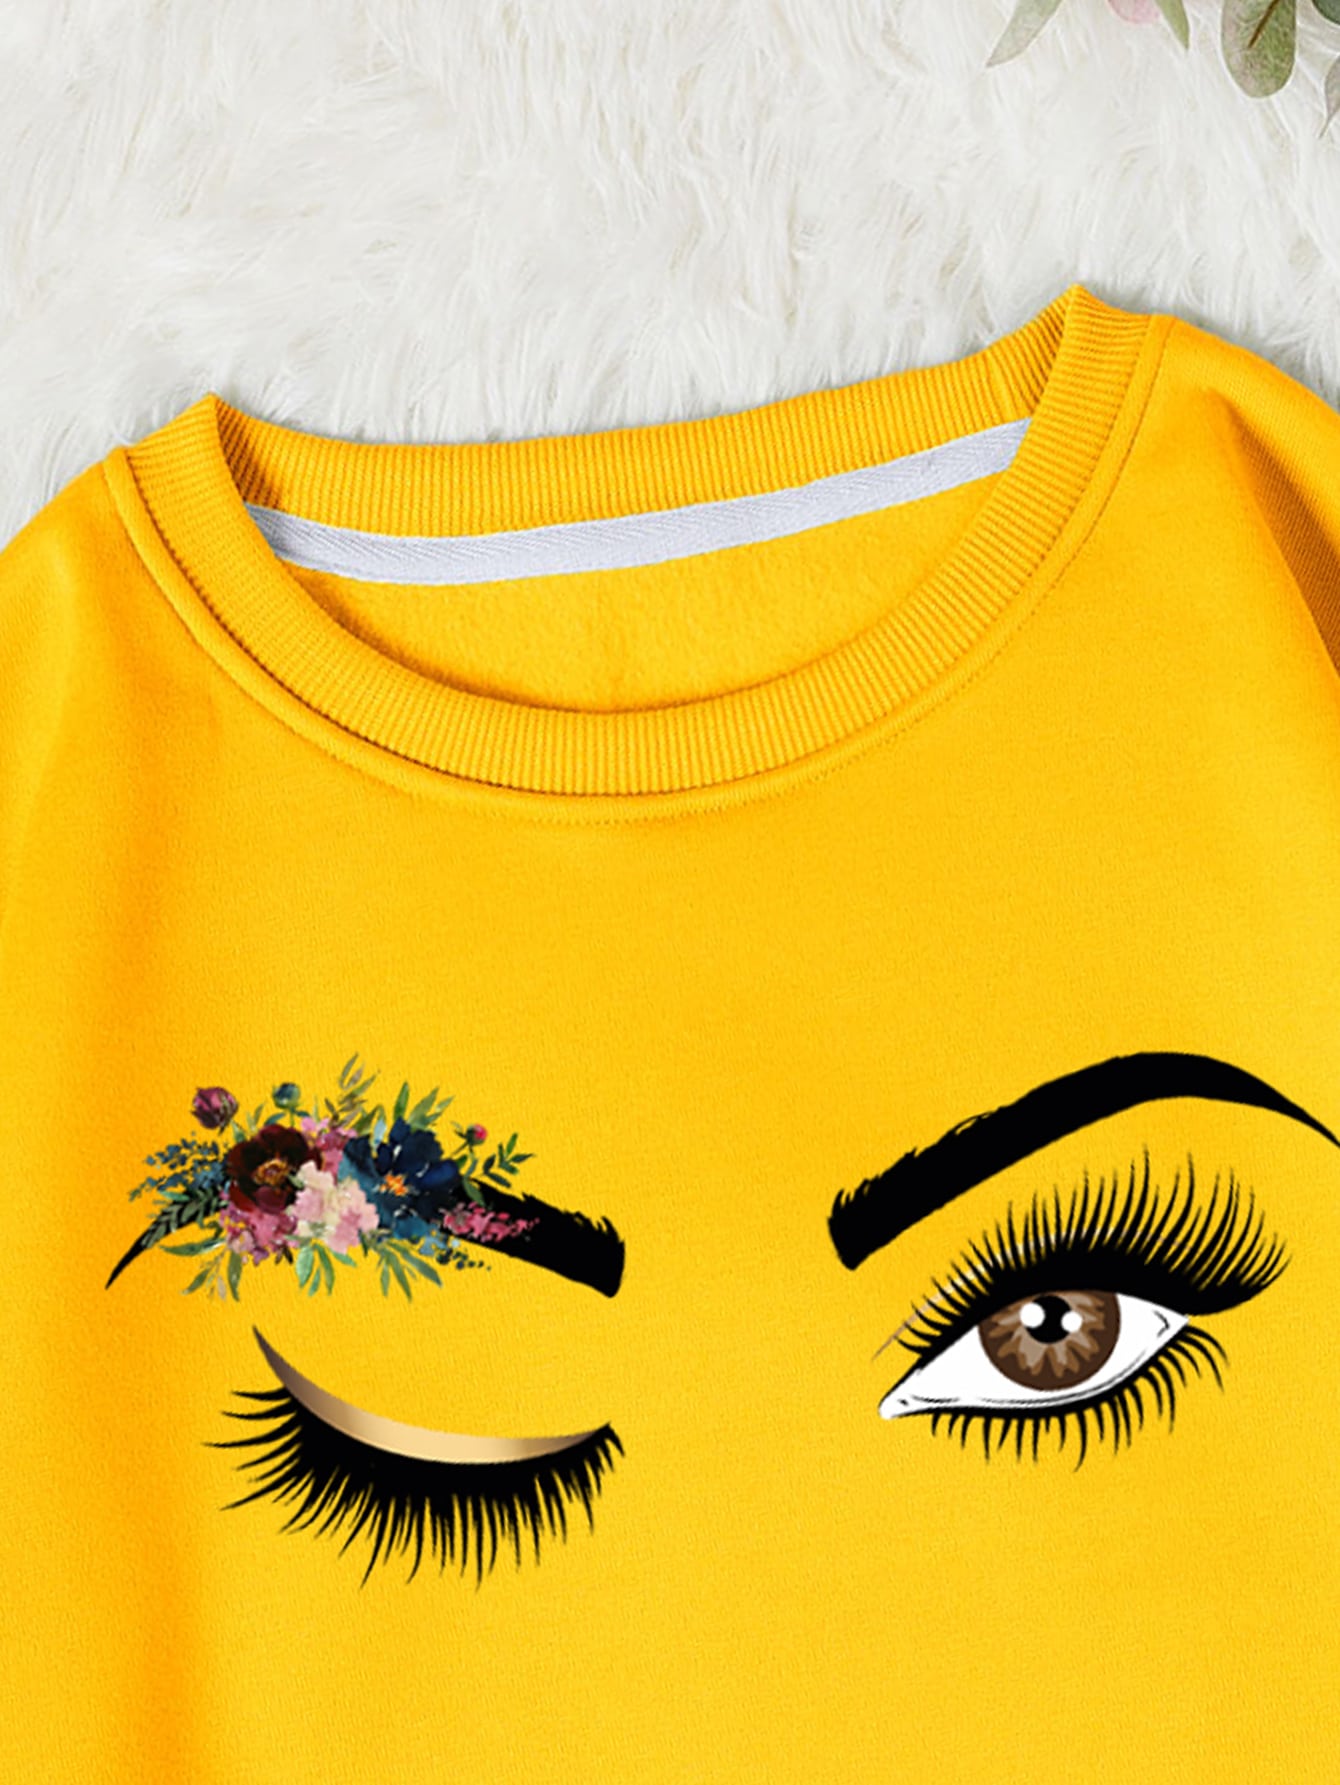 Floral And Eyes Print Thermal Lined Sweatshirt